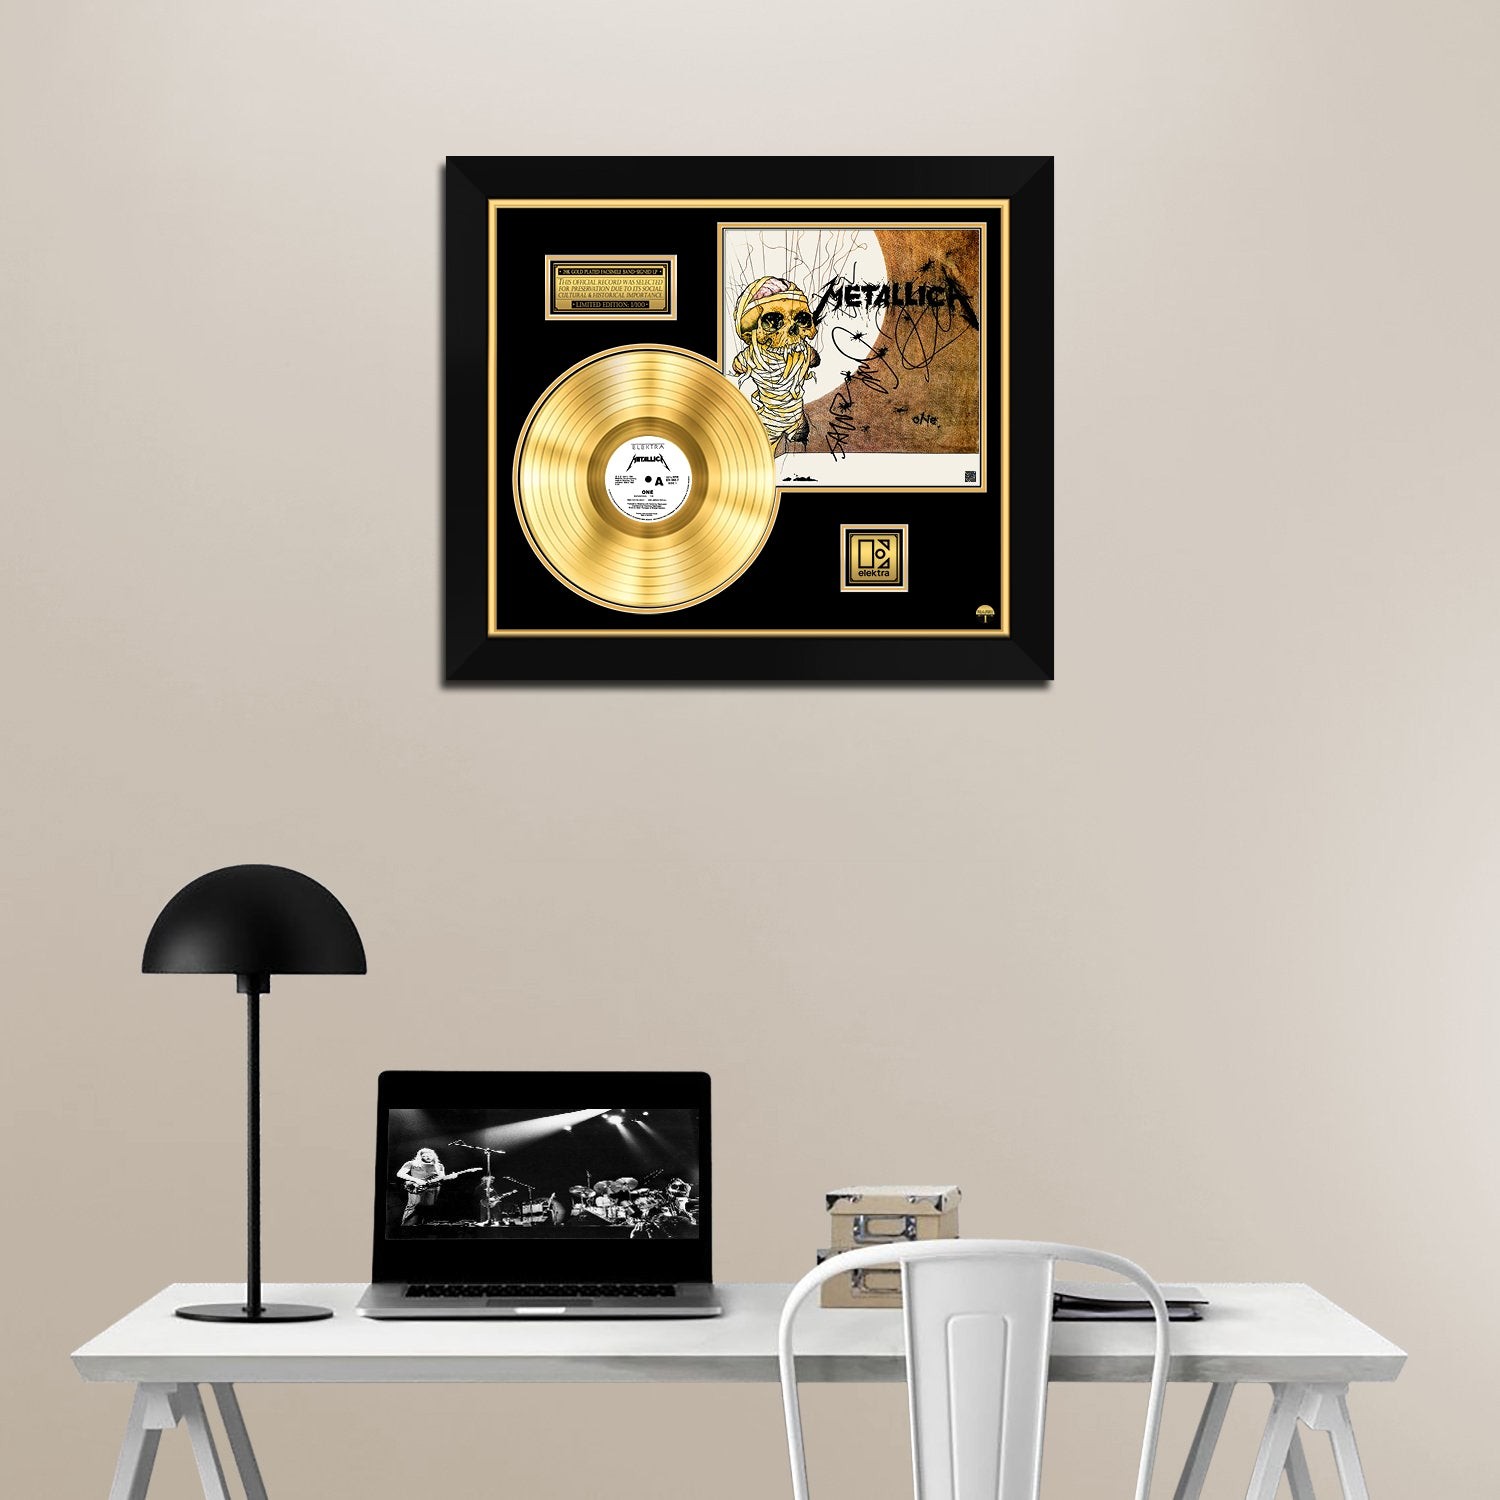 Metallica - One Framed Signature Gold LP Record Display M4